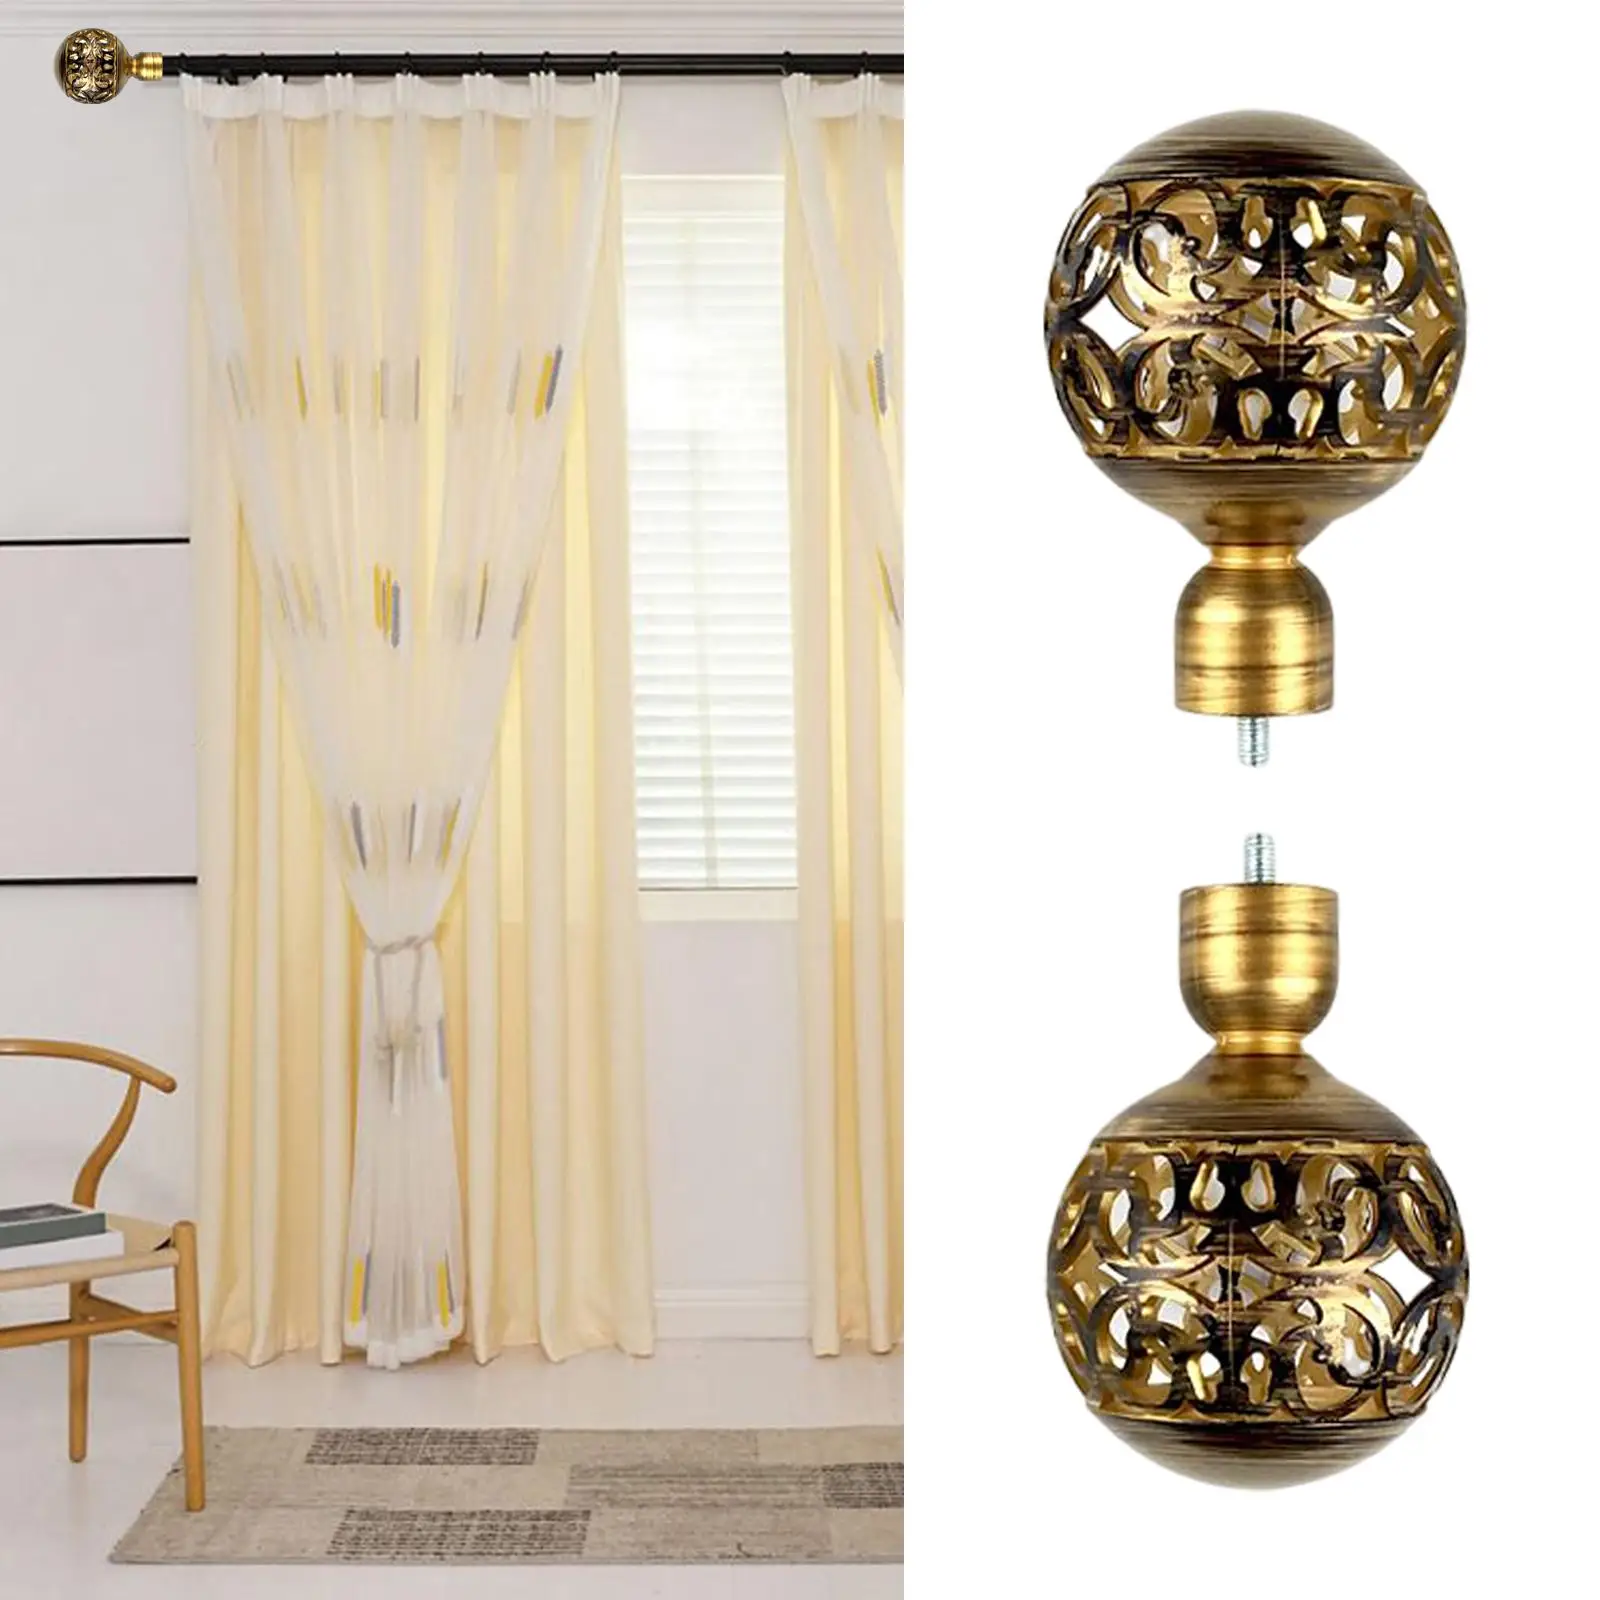 2Pcs Replacement Curtain Rod Finials 3/4 inch Diameter Vintage Accessories Drapery Rod Finials for Office Bathroom Living Room